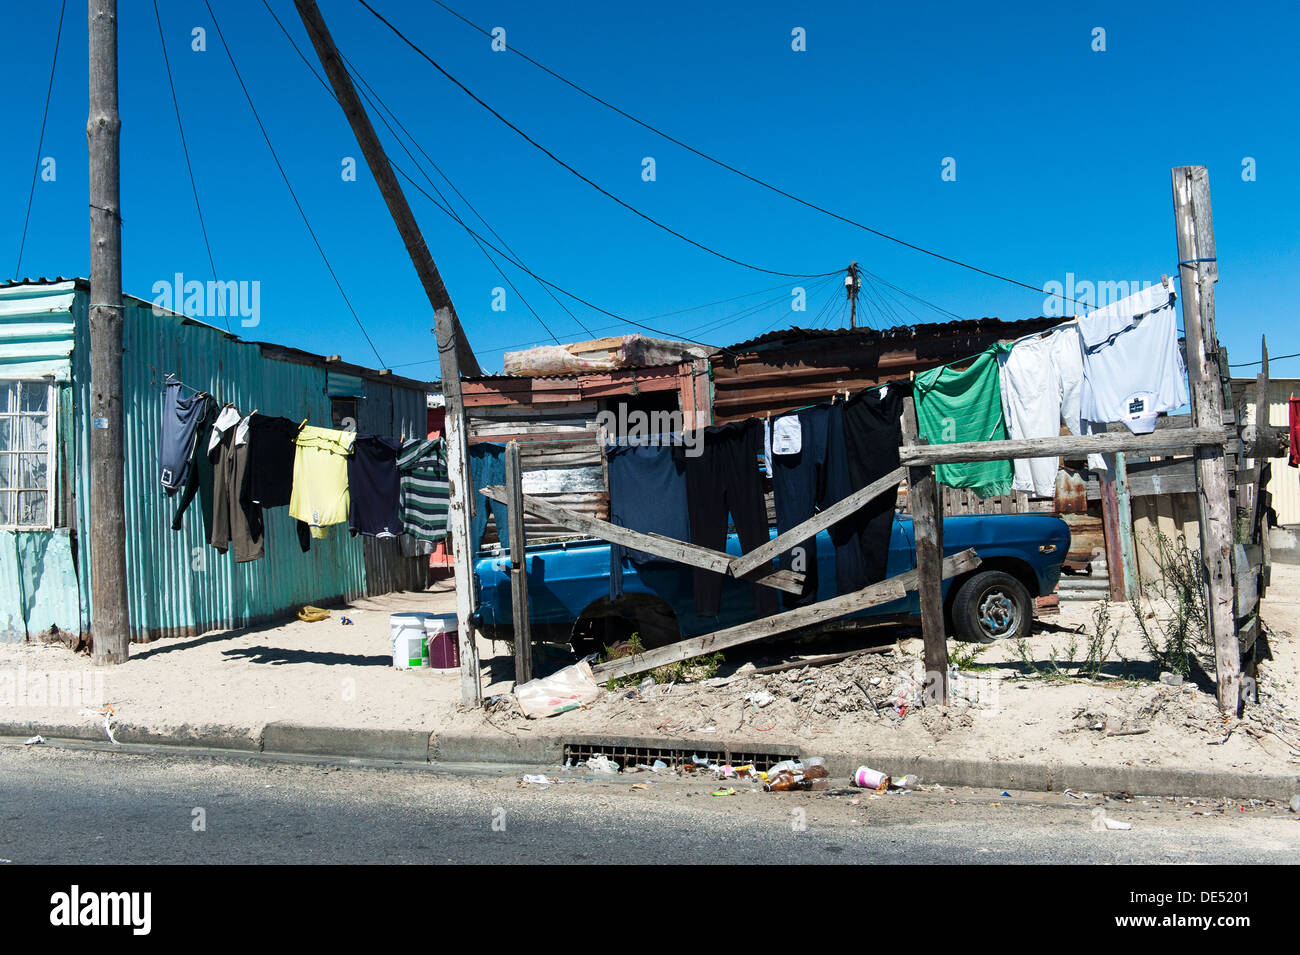 Laundry, parked car and tin shack in Khayelitsha, a partially informal township in Cape Town, Western Cape, South Africa Stock Photo